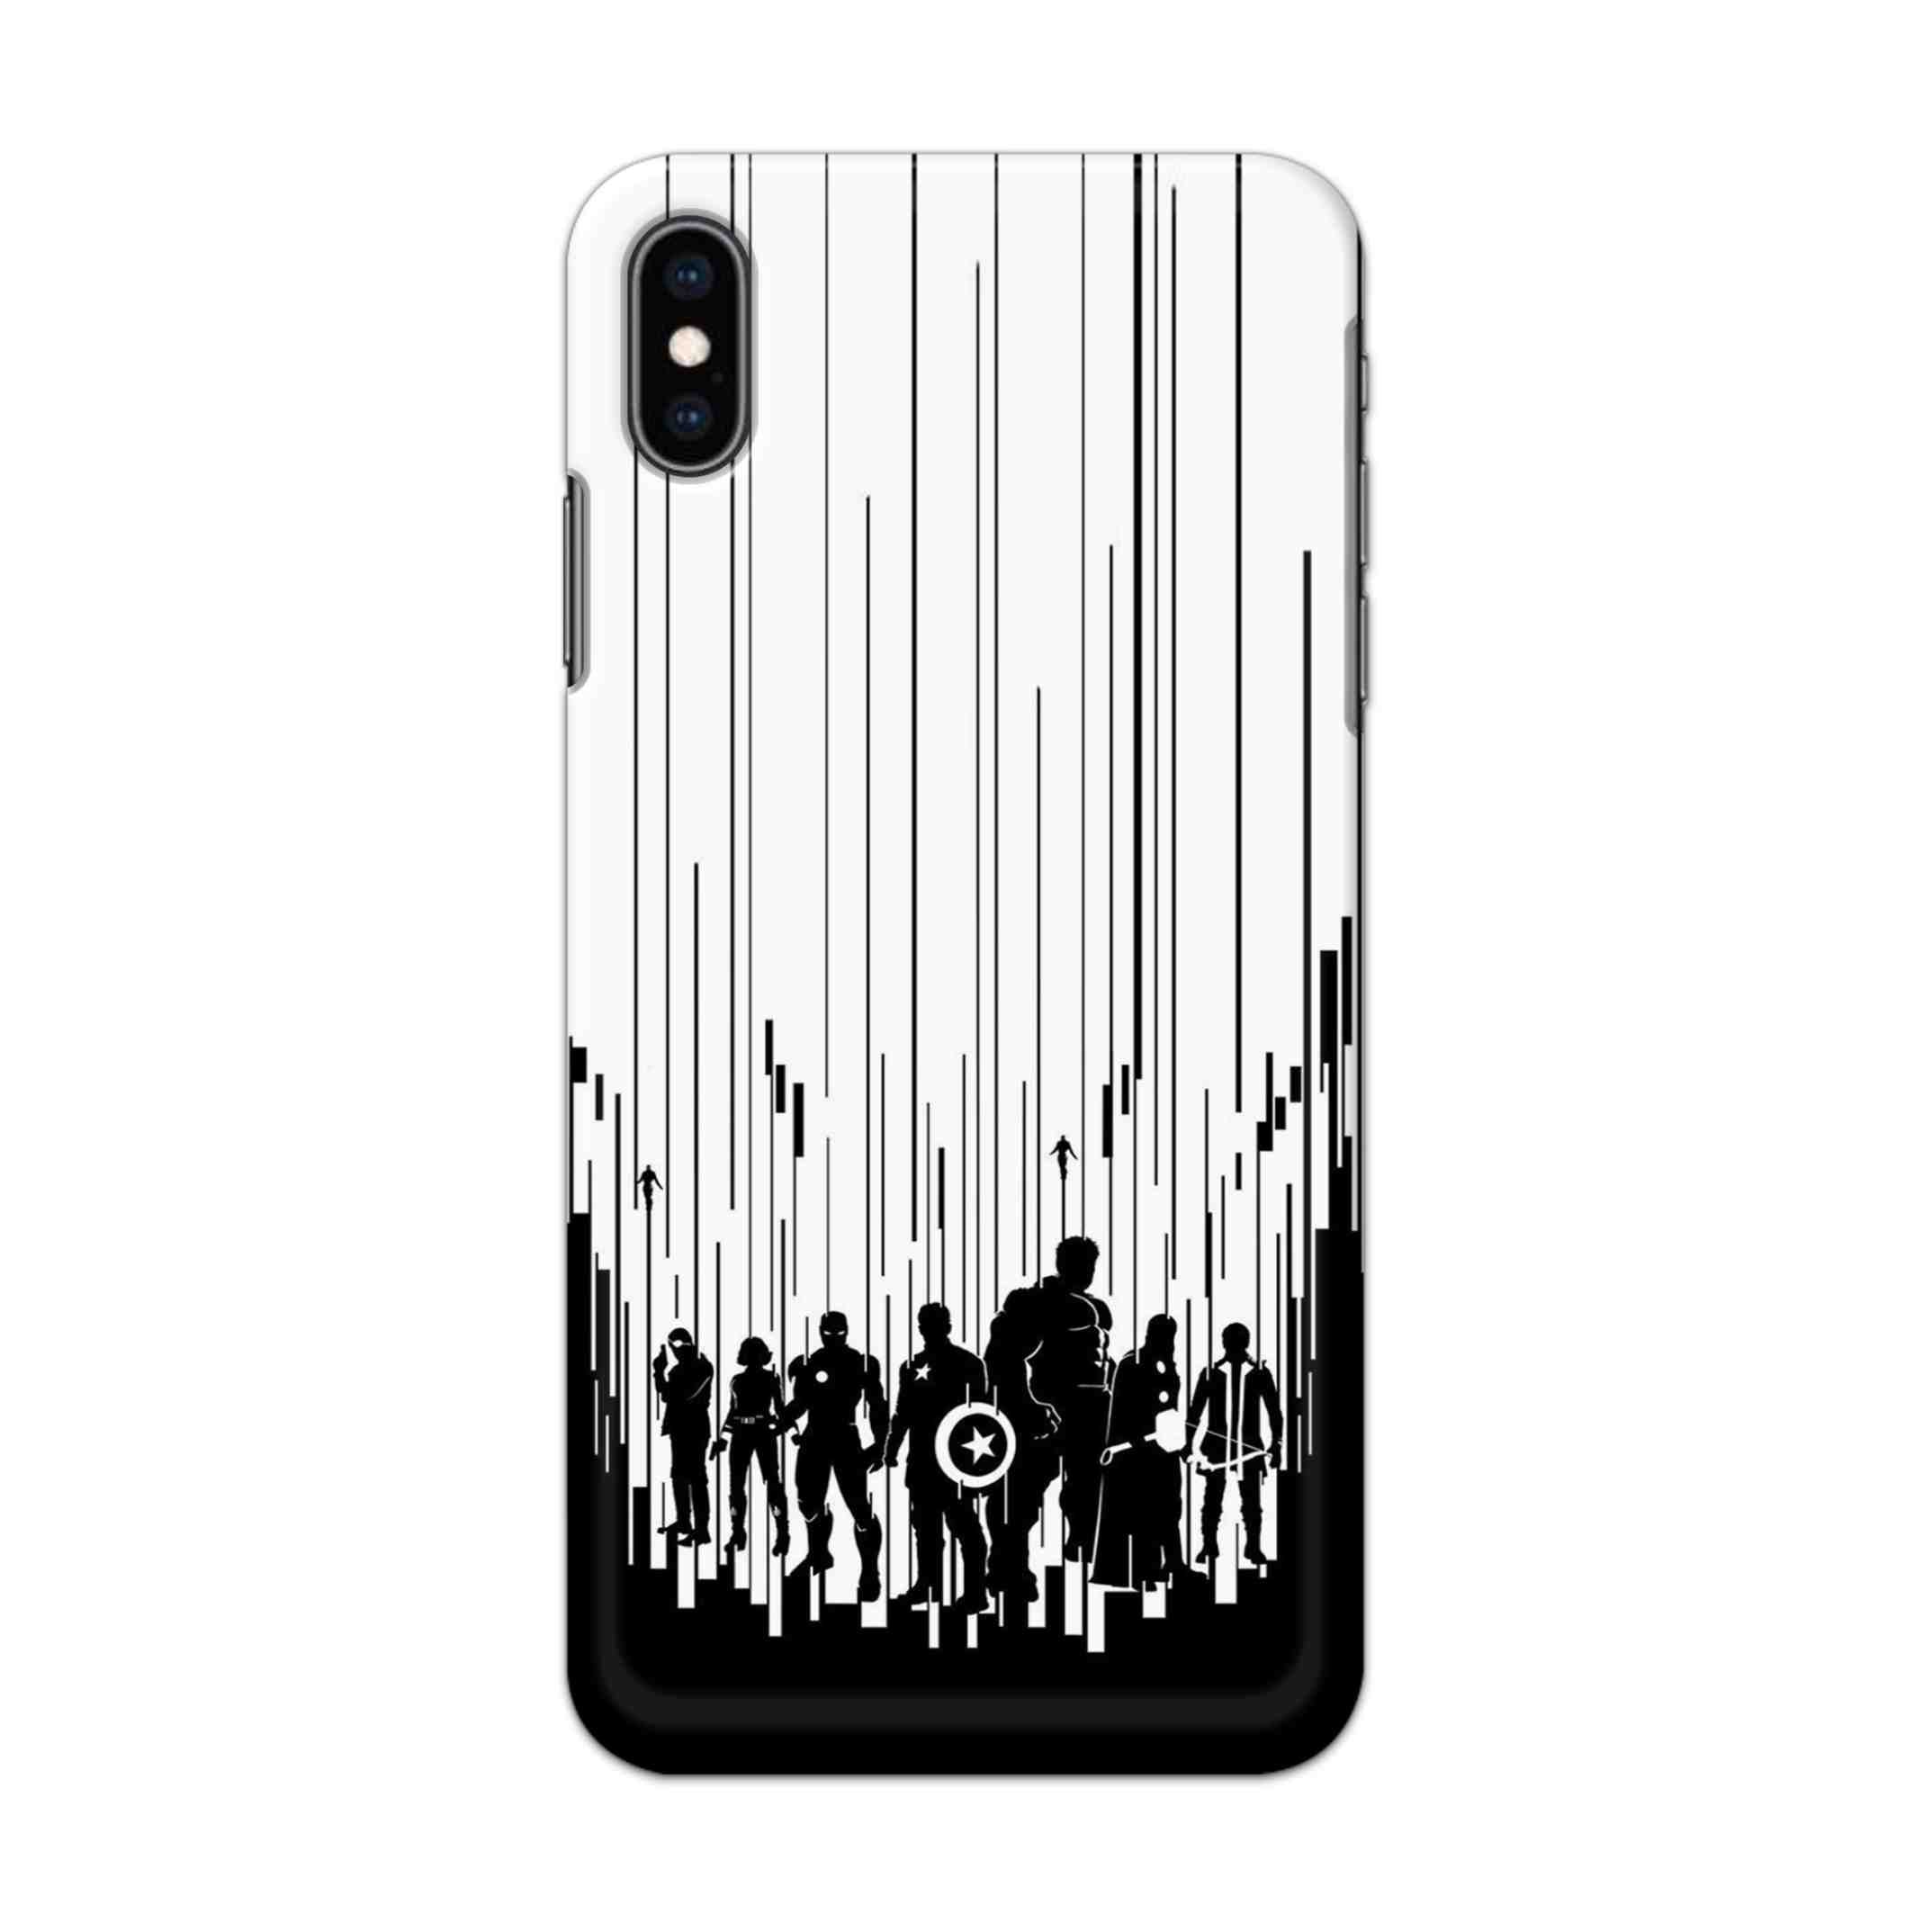 Buy Black And White Avanegers Hard Back Mobile Phone Case/Cover For iPhone XS MAX Online